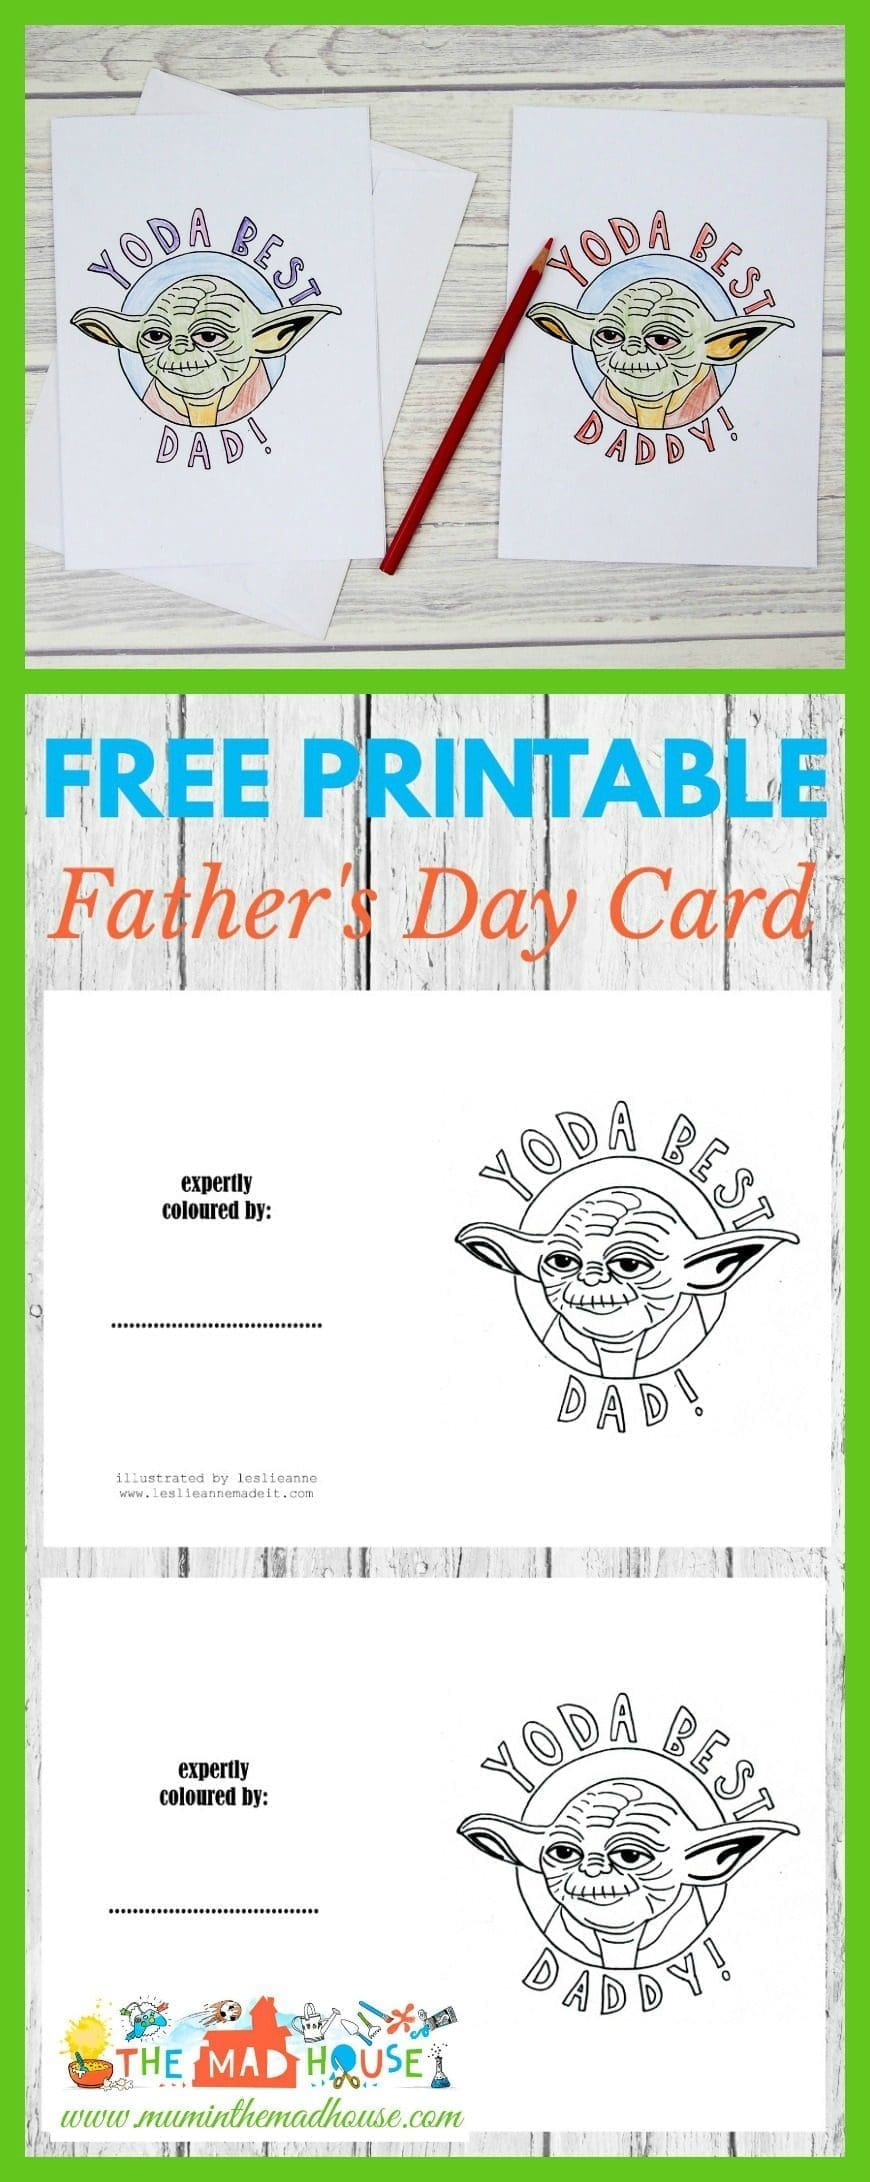 Is your Father the best? Tell him this Father's Day with these Star Wars inspired Yoda Best Dad Colouring Cards. "Best your Father is"! A super fun DIY craft for the kids just in time for Father's Day. What Dad doesn't want a home made Father's Day Card.